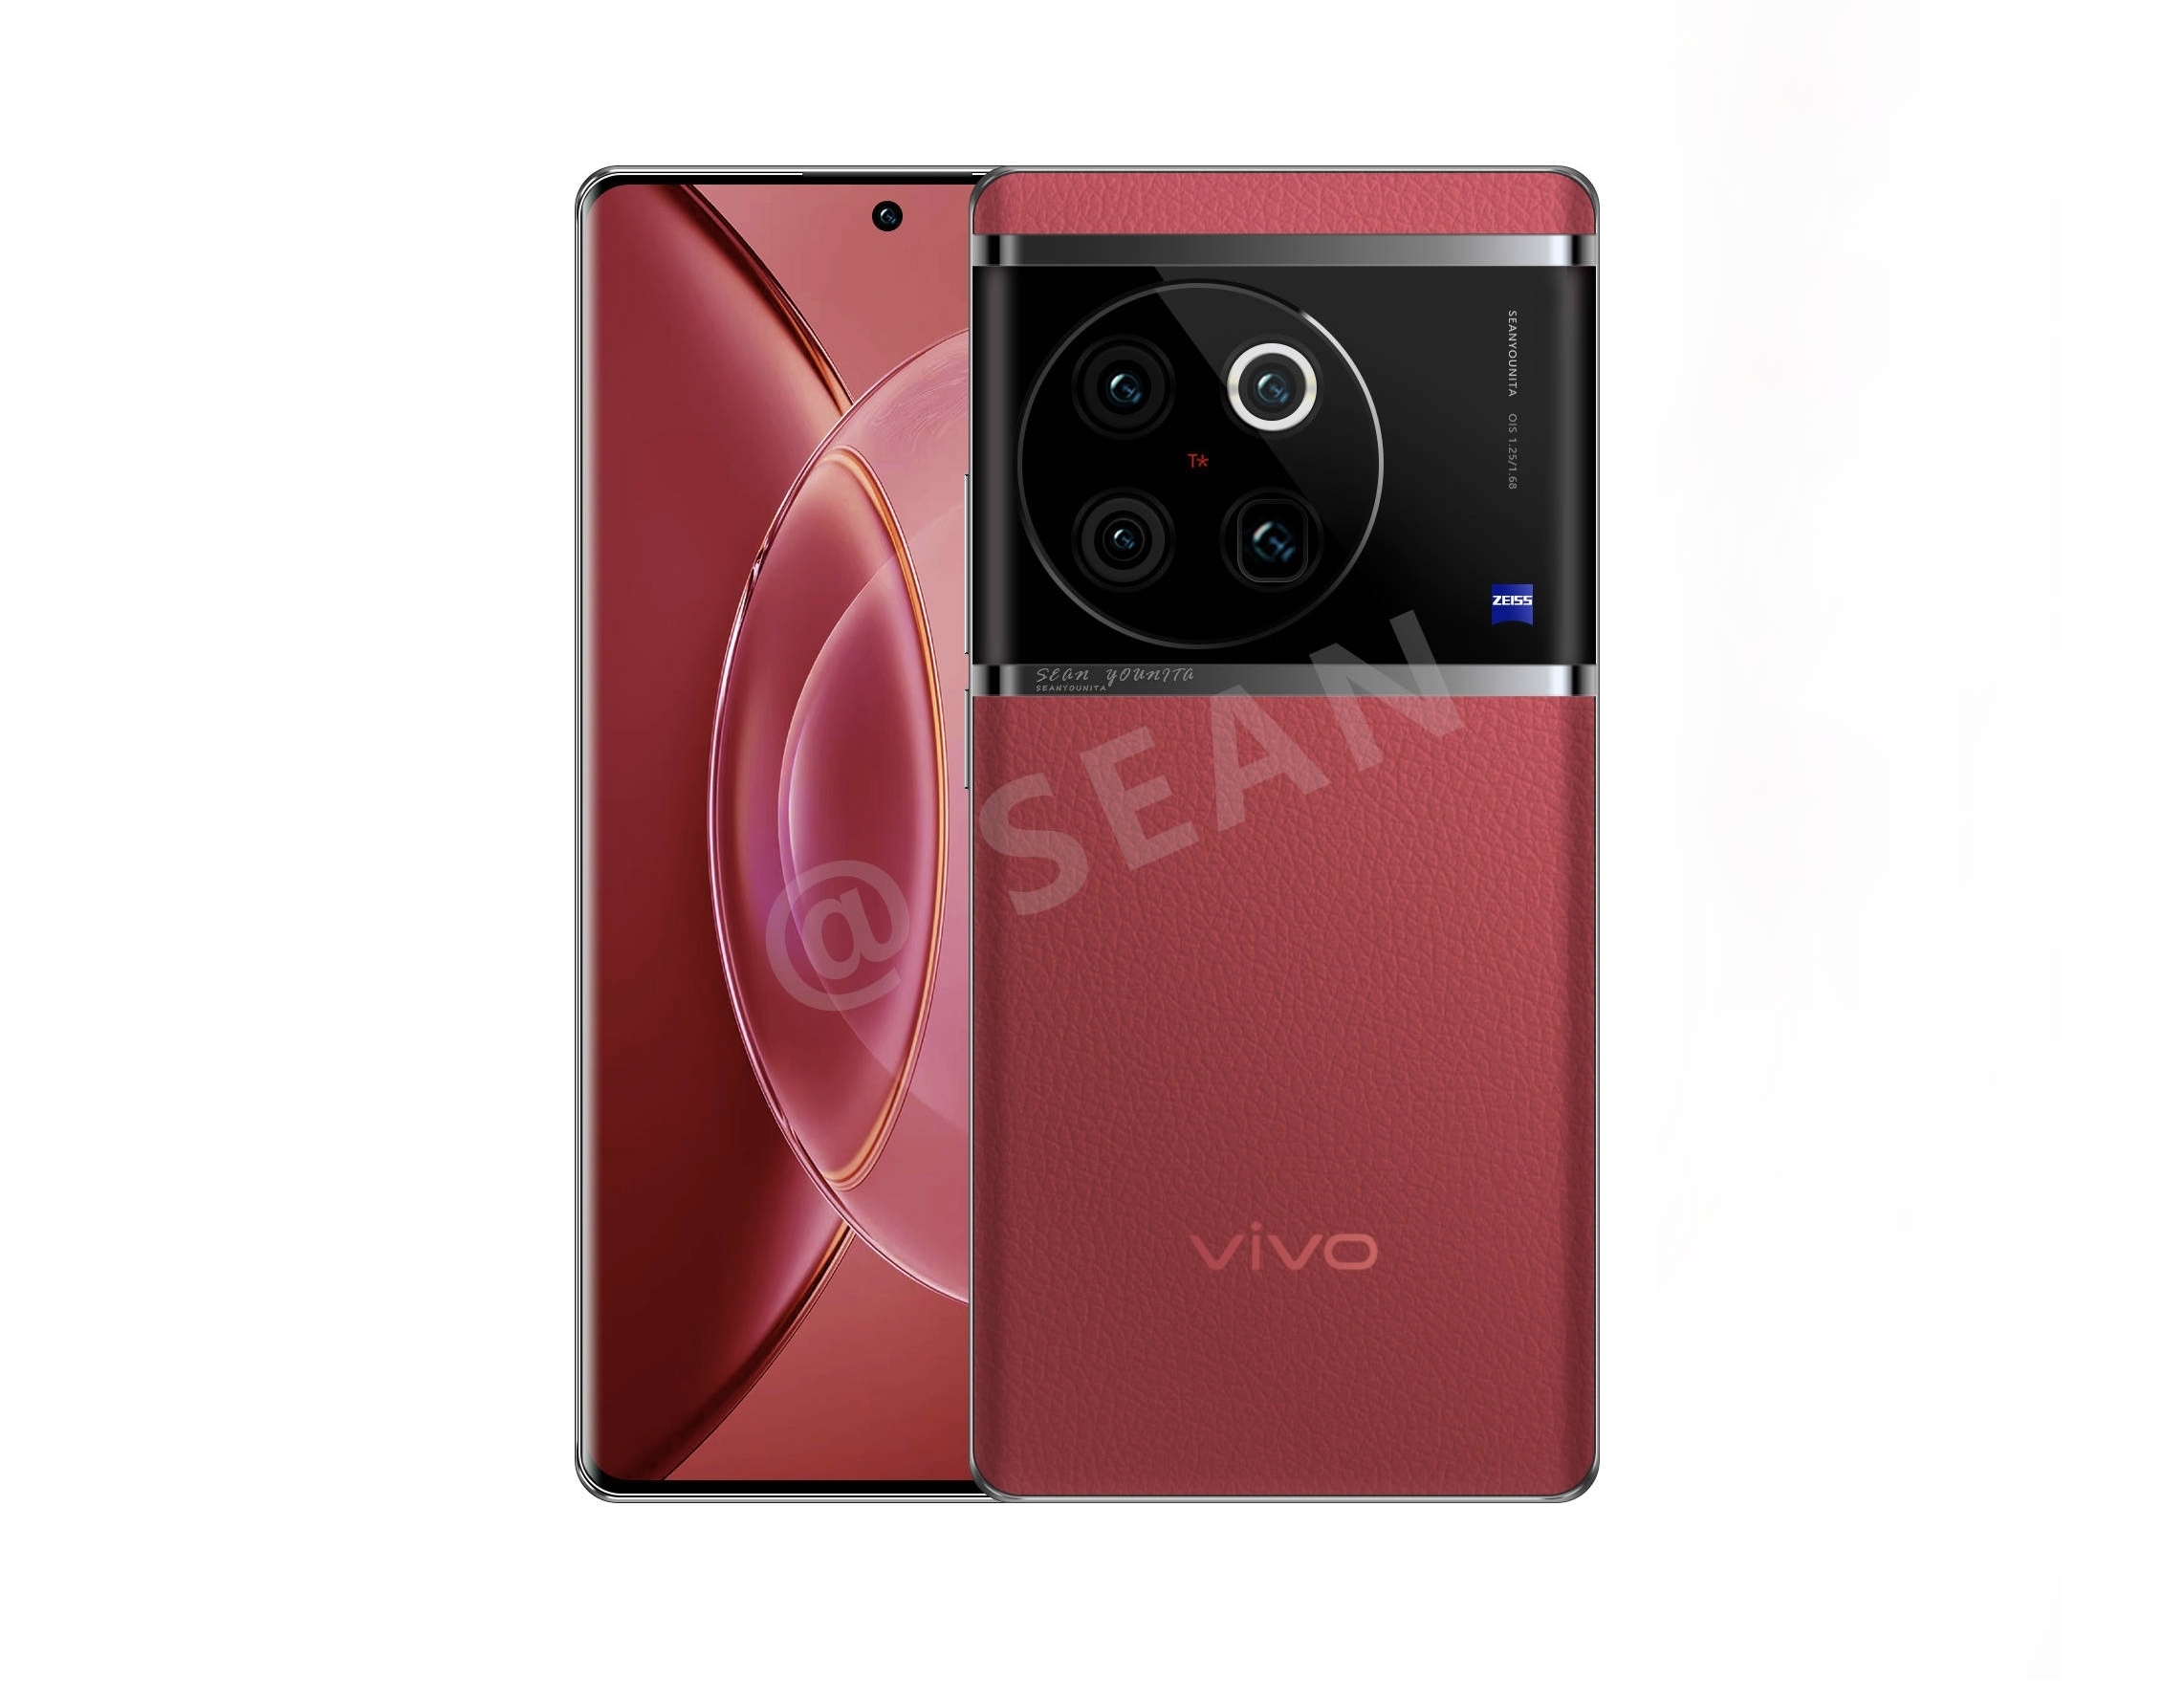 Insider reveals what the vivo X100 will look like: the company's next top smartphone